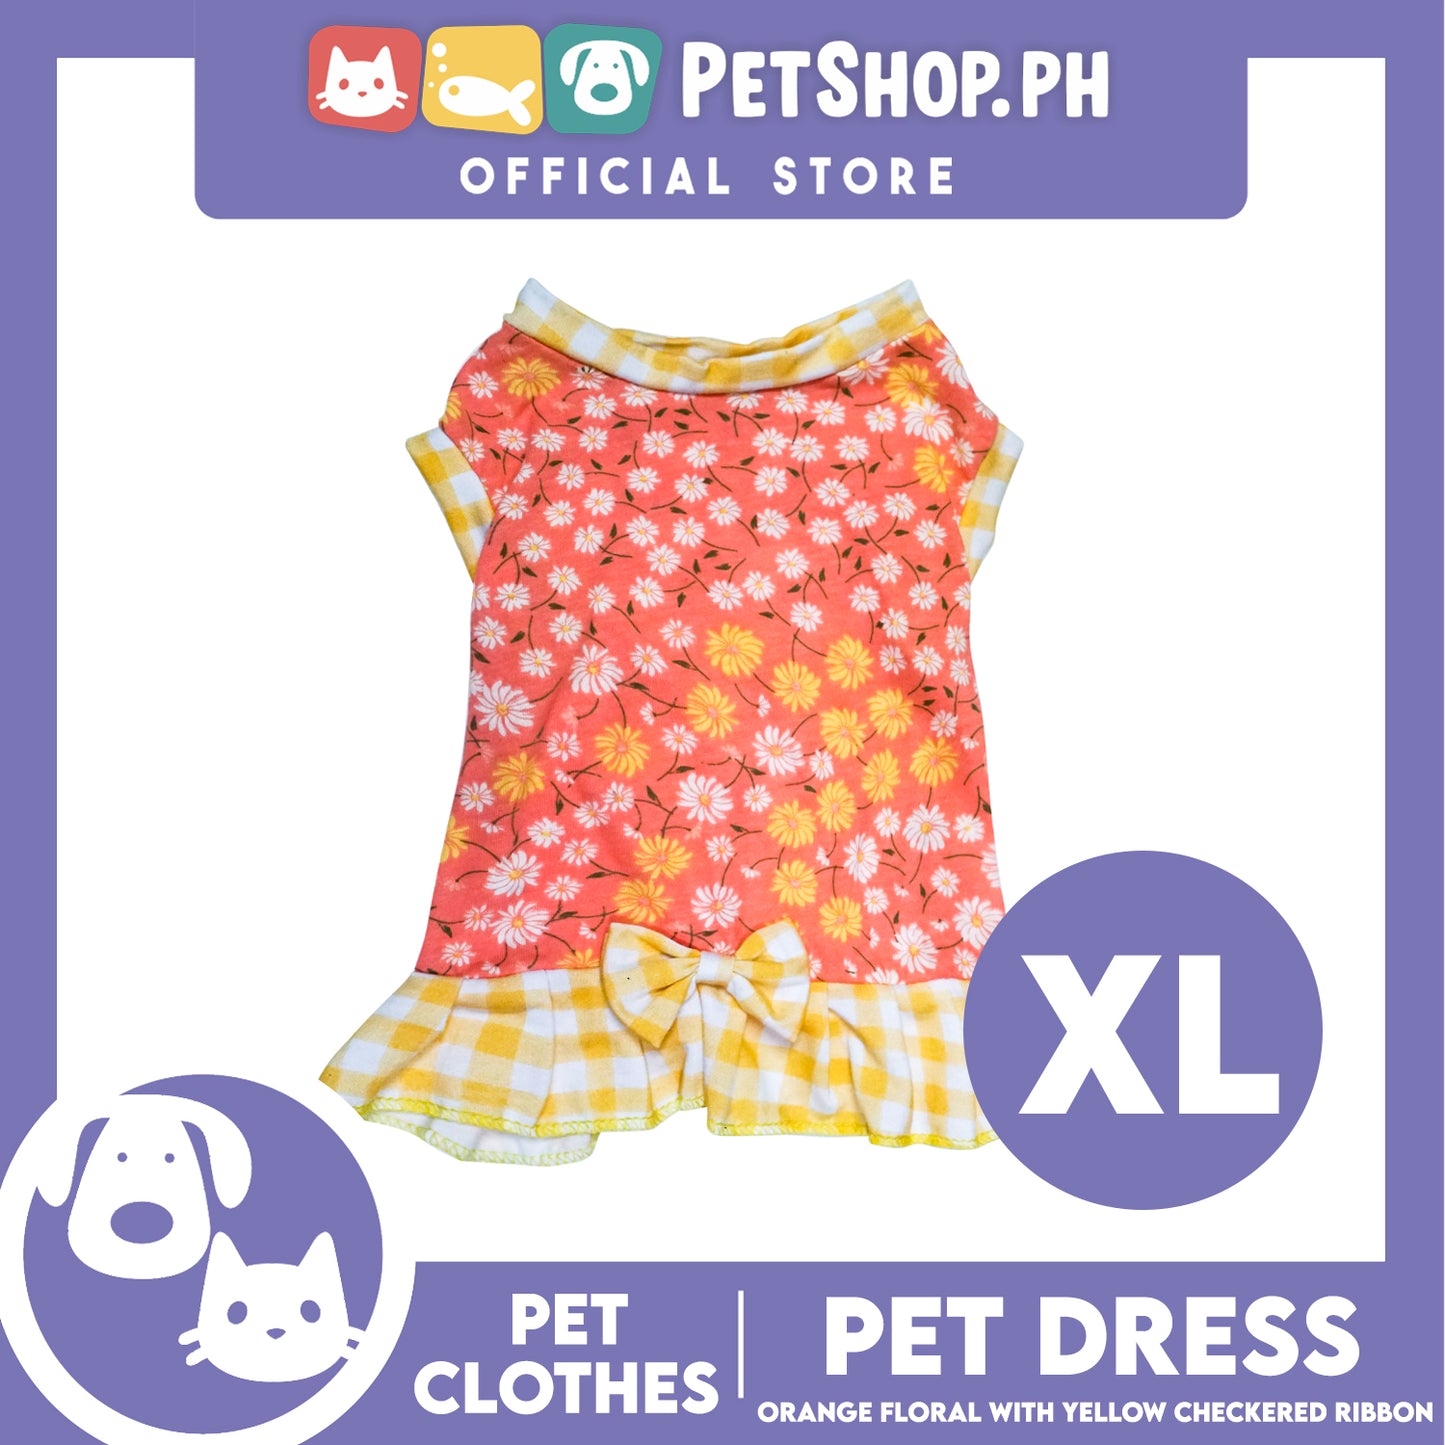 Pet Dress Orange Floral Yellow Checkered with Ribbon (Extra Large) Pet Dress Clothes Perfect for Dogs